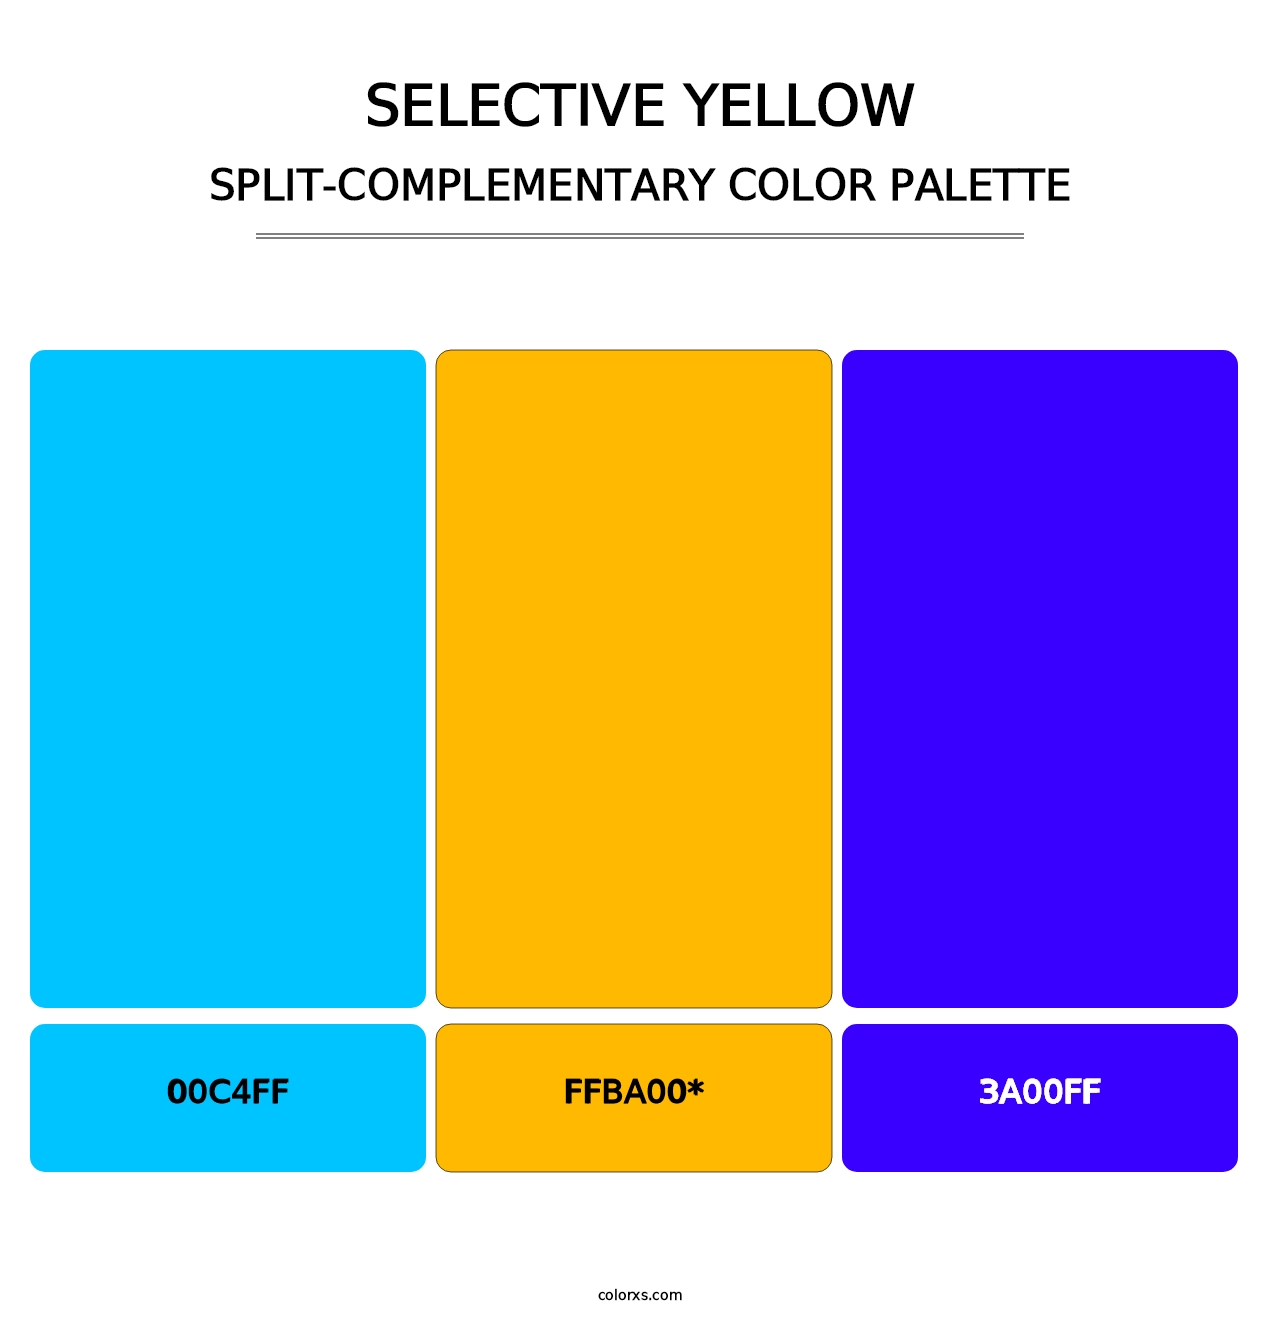 Selective yellow - Split-Complementary Color Palette